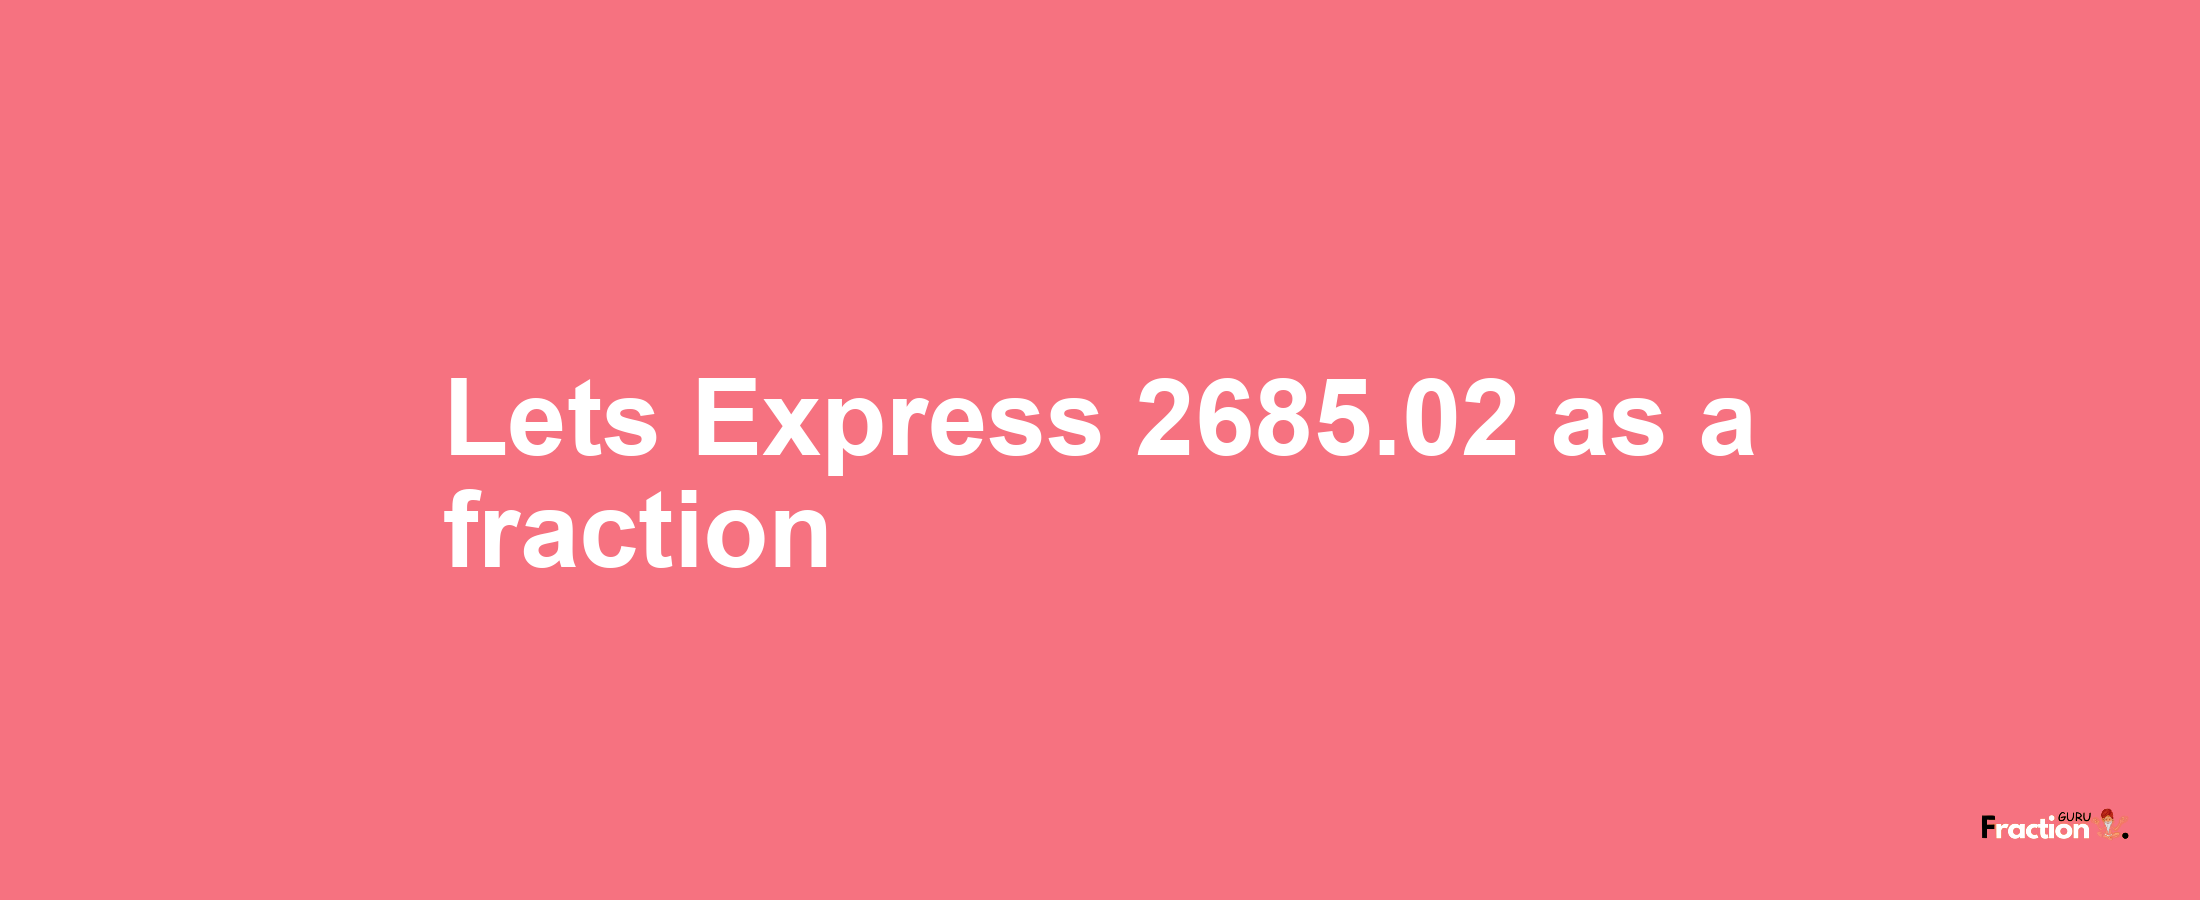 Lets Express 2685.02 as afraction